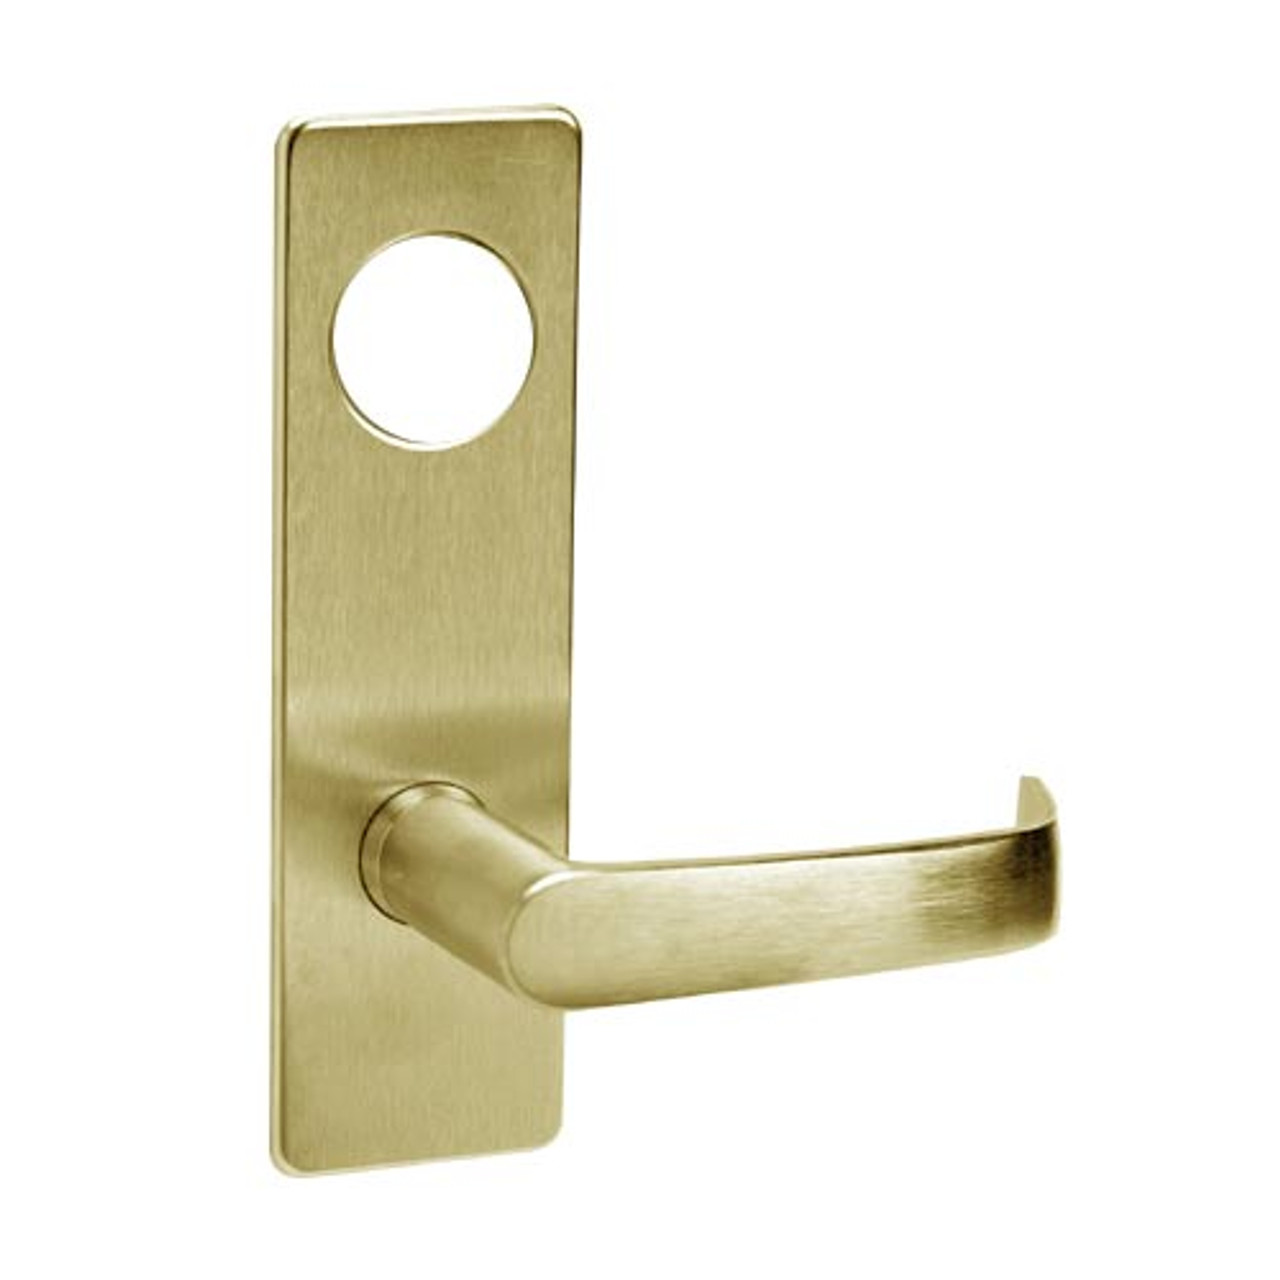 ML2024-NSP-606-LC Corbin Russwin ML2000 Series Mortise Entrance Locksets with Newport Lever in Satin Brass